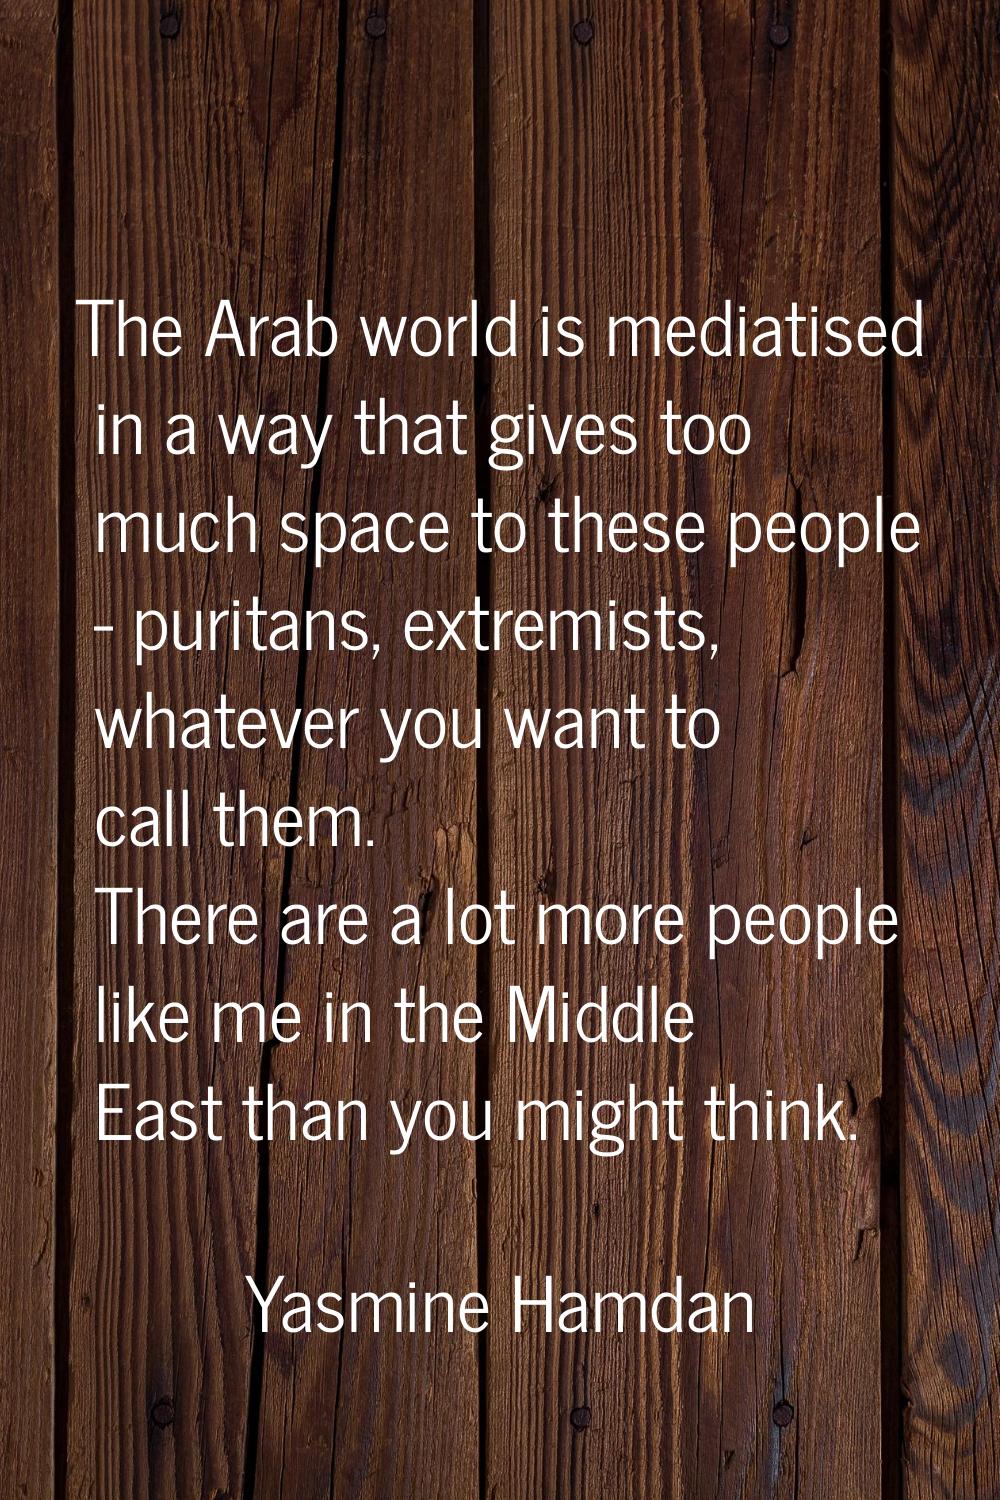 The Arab world is mediatised in a way that gives too much space to these people - puritans, extremi